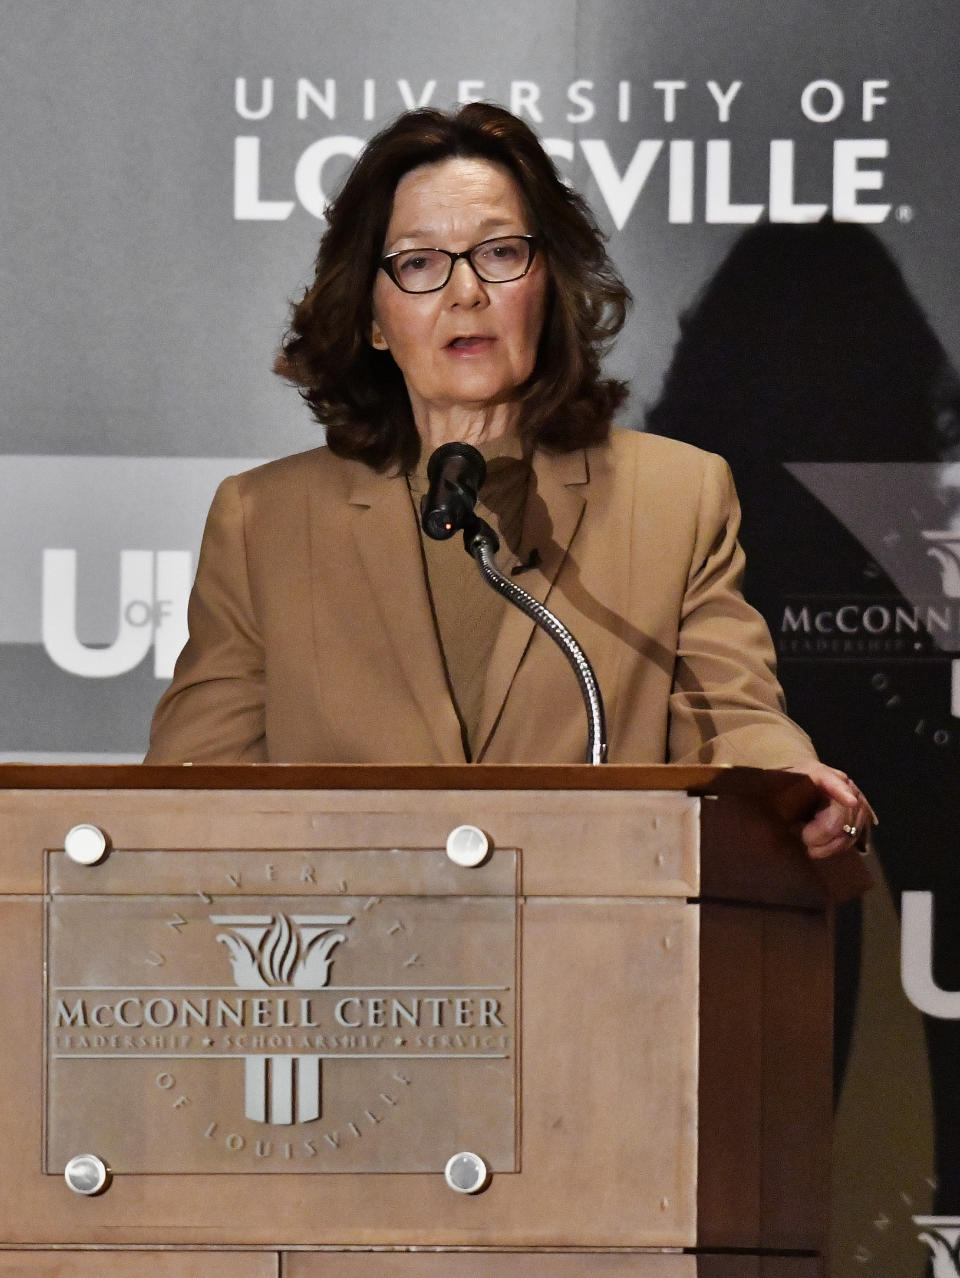 CIA Director Gina Haspel addresses the audience as part of the McConnell Center Distinguished Speaker Series at the University of Louisville, Monday, Sept. 24, 2018, in Louisville, Ky. (AP Photo/Timothy D. Easley)